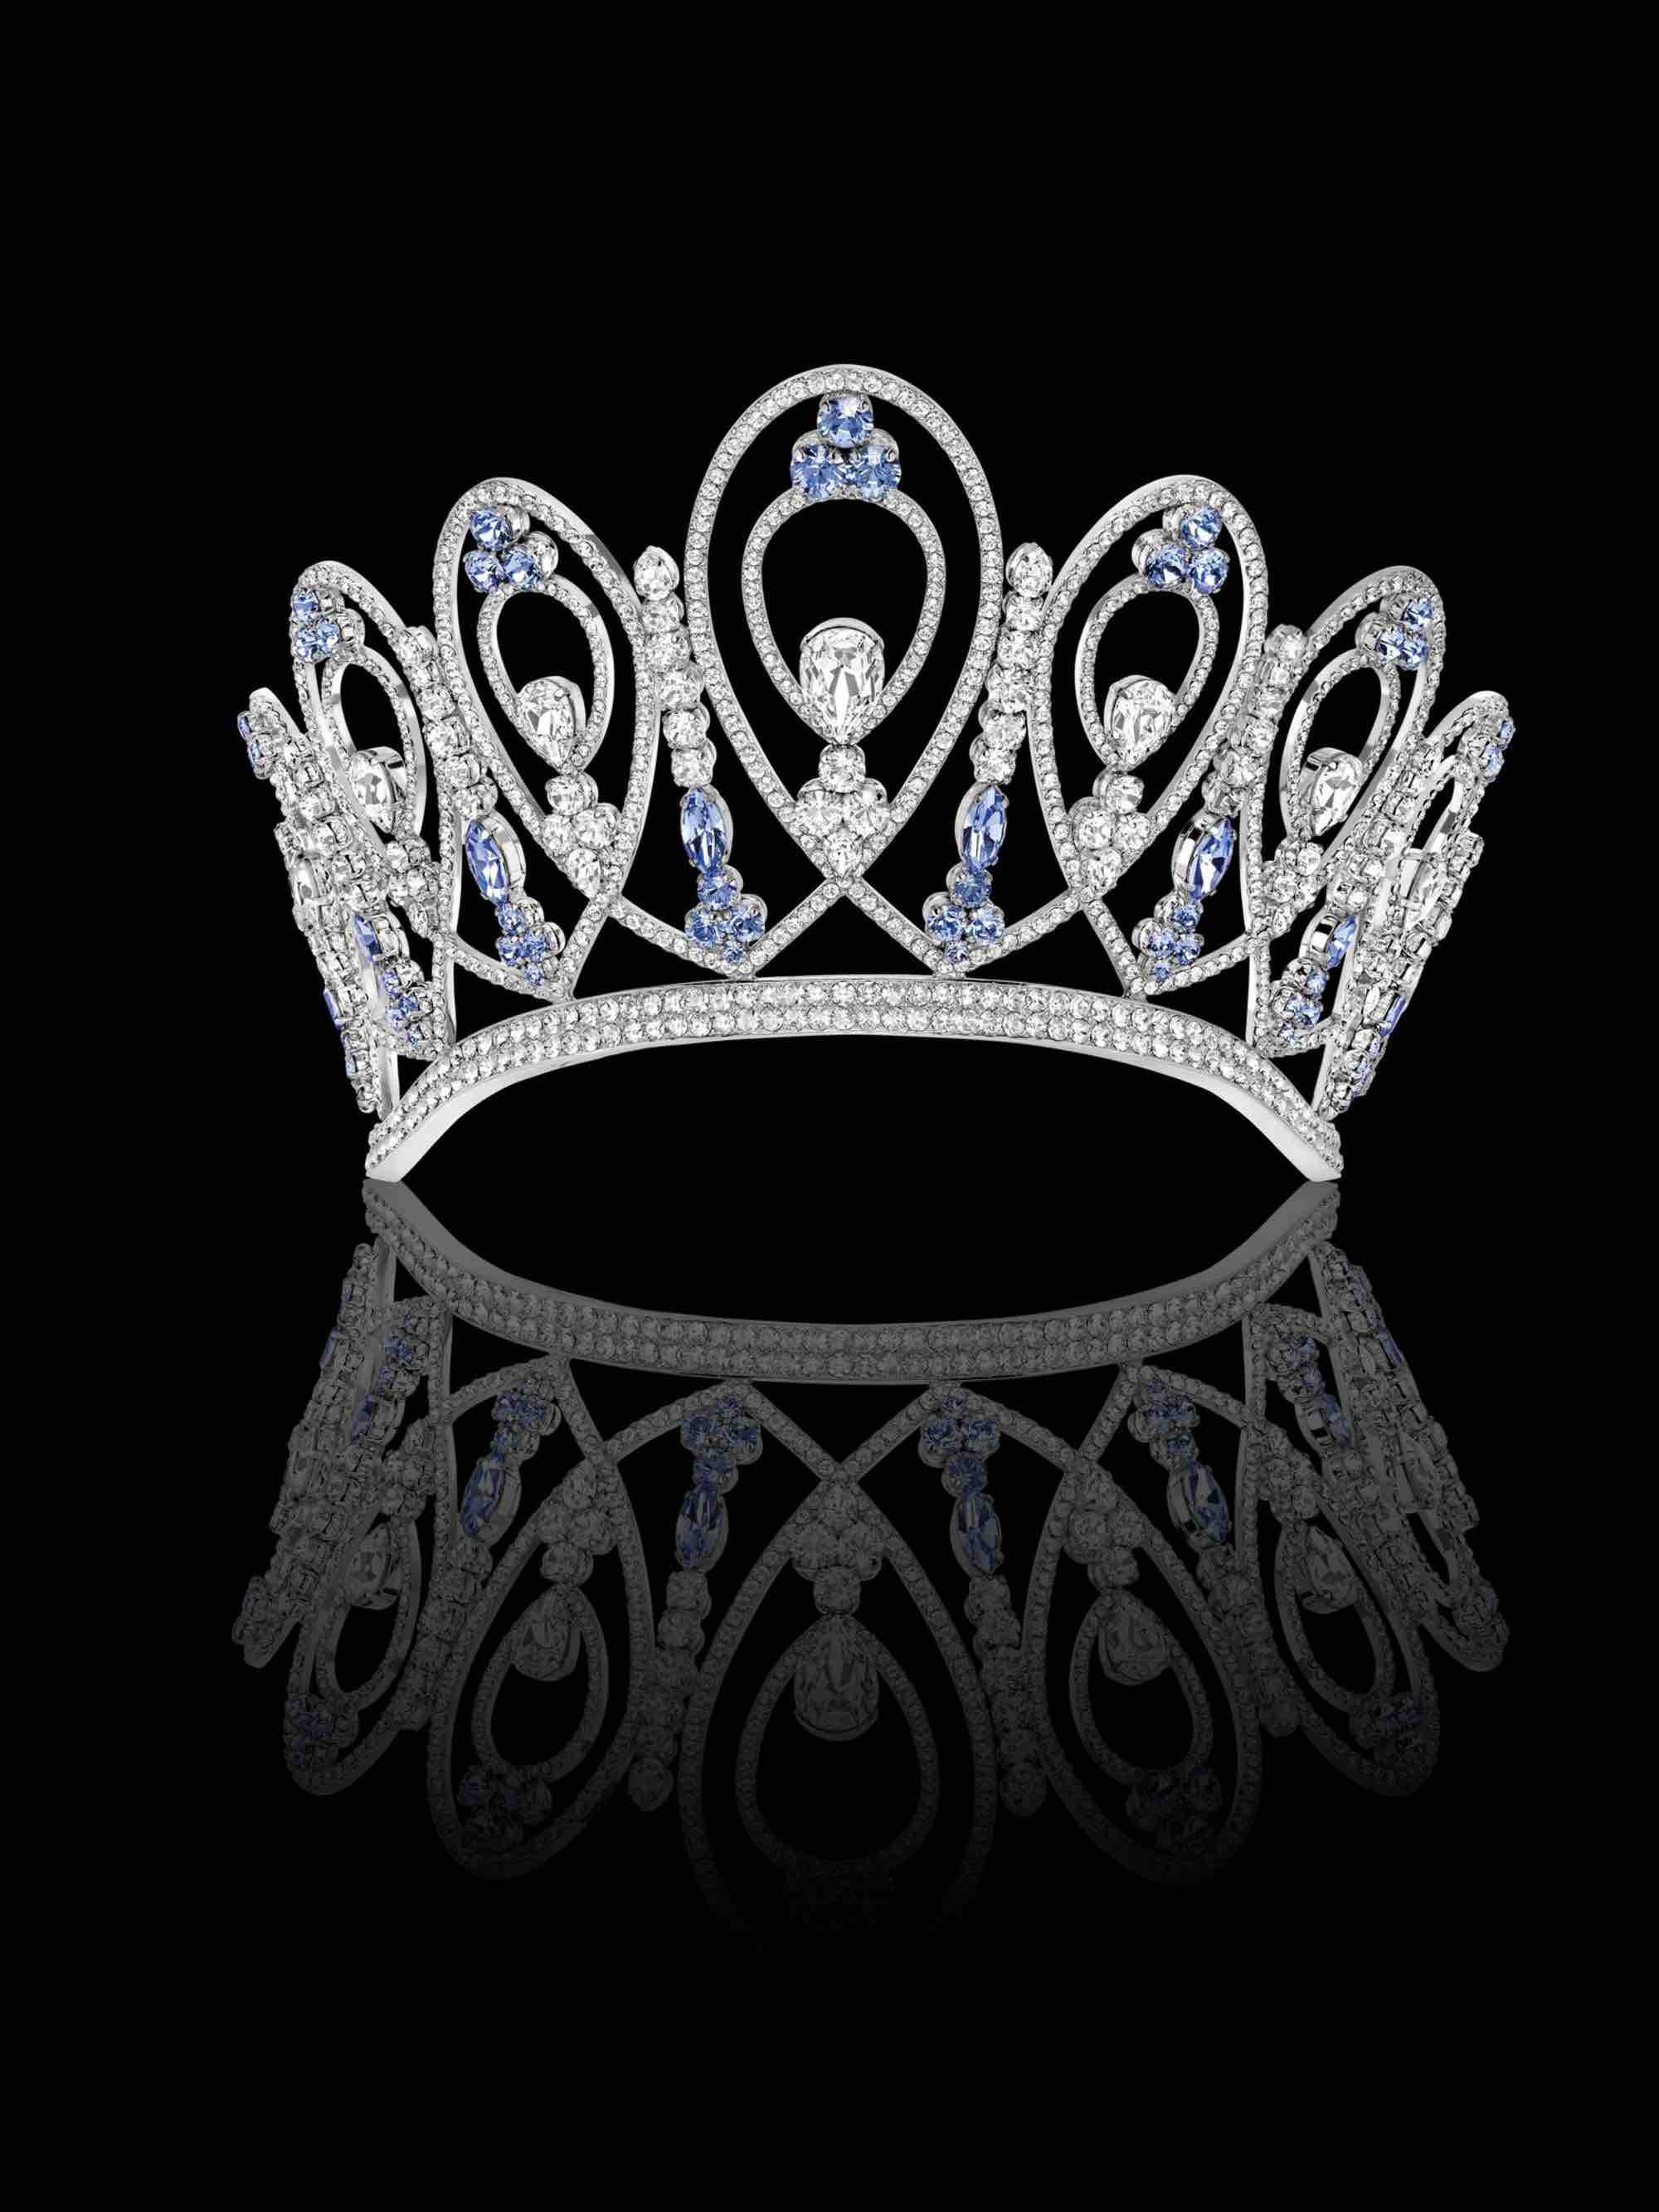 Miss France 2018 couronne